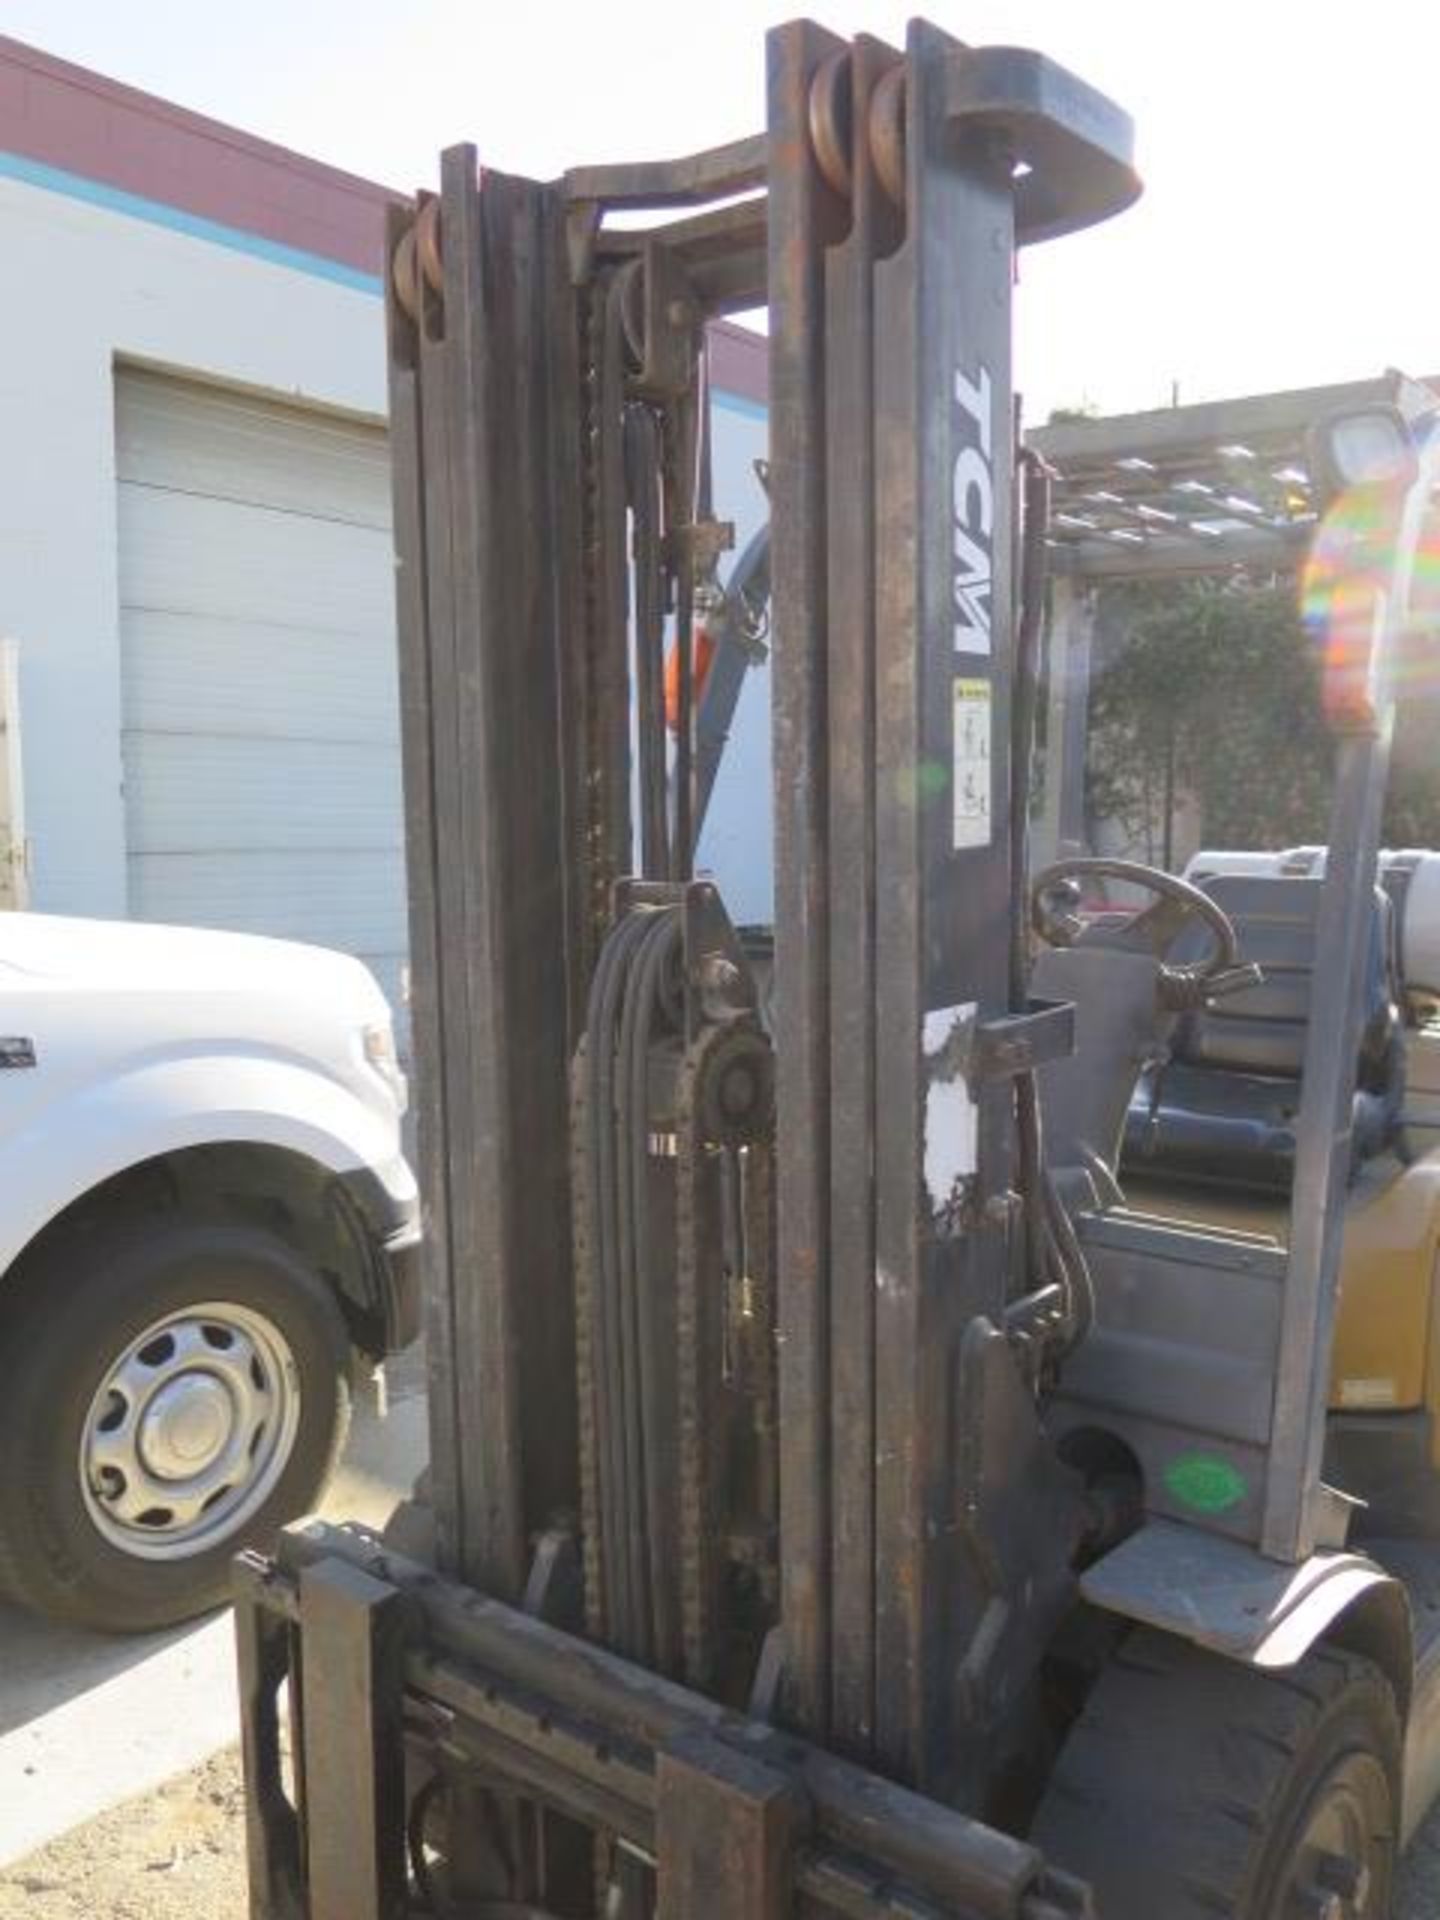 TCM FHG30T3 5300 Lb Cap LPG Forklift s/n 2K901009 w/ 3-Stage Mast, 189" Lift Height, Side Shift, 4th - Image 5 of 15